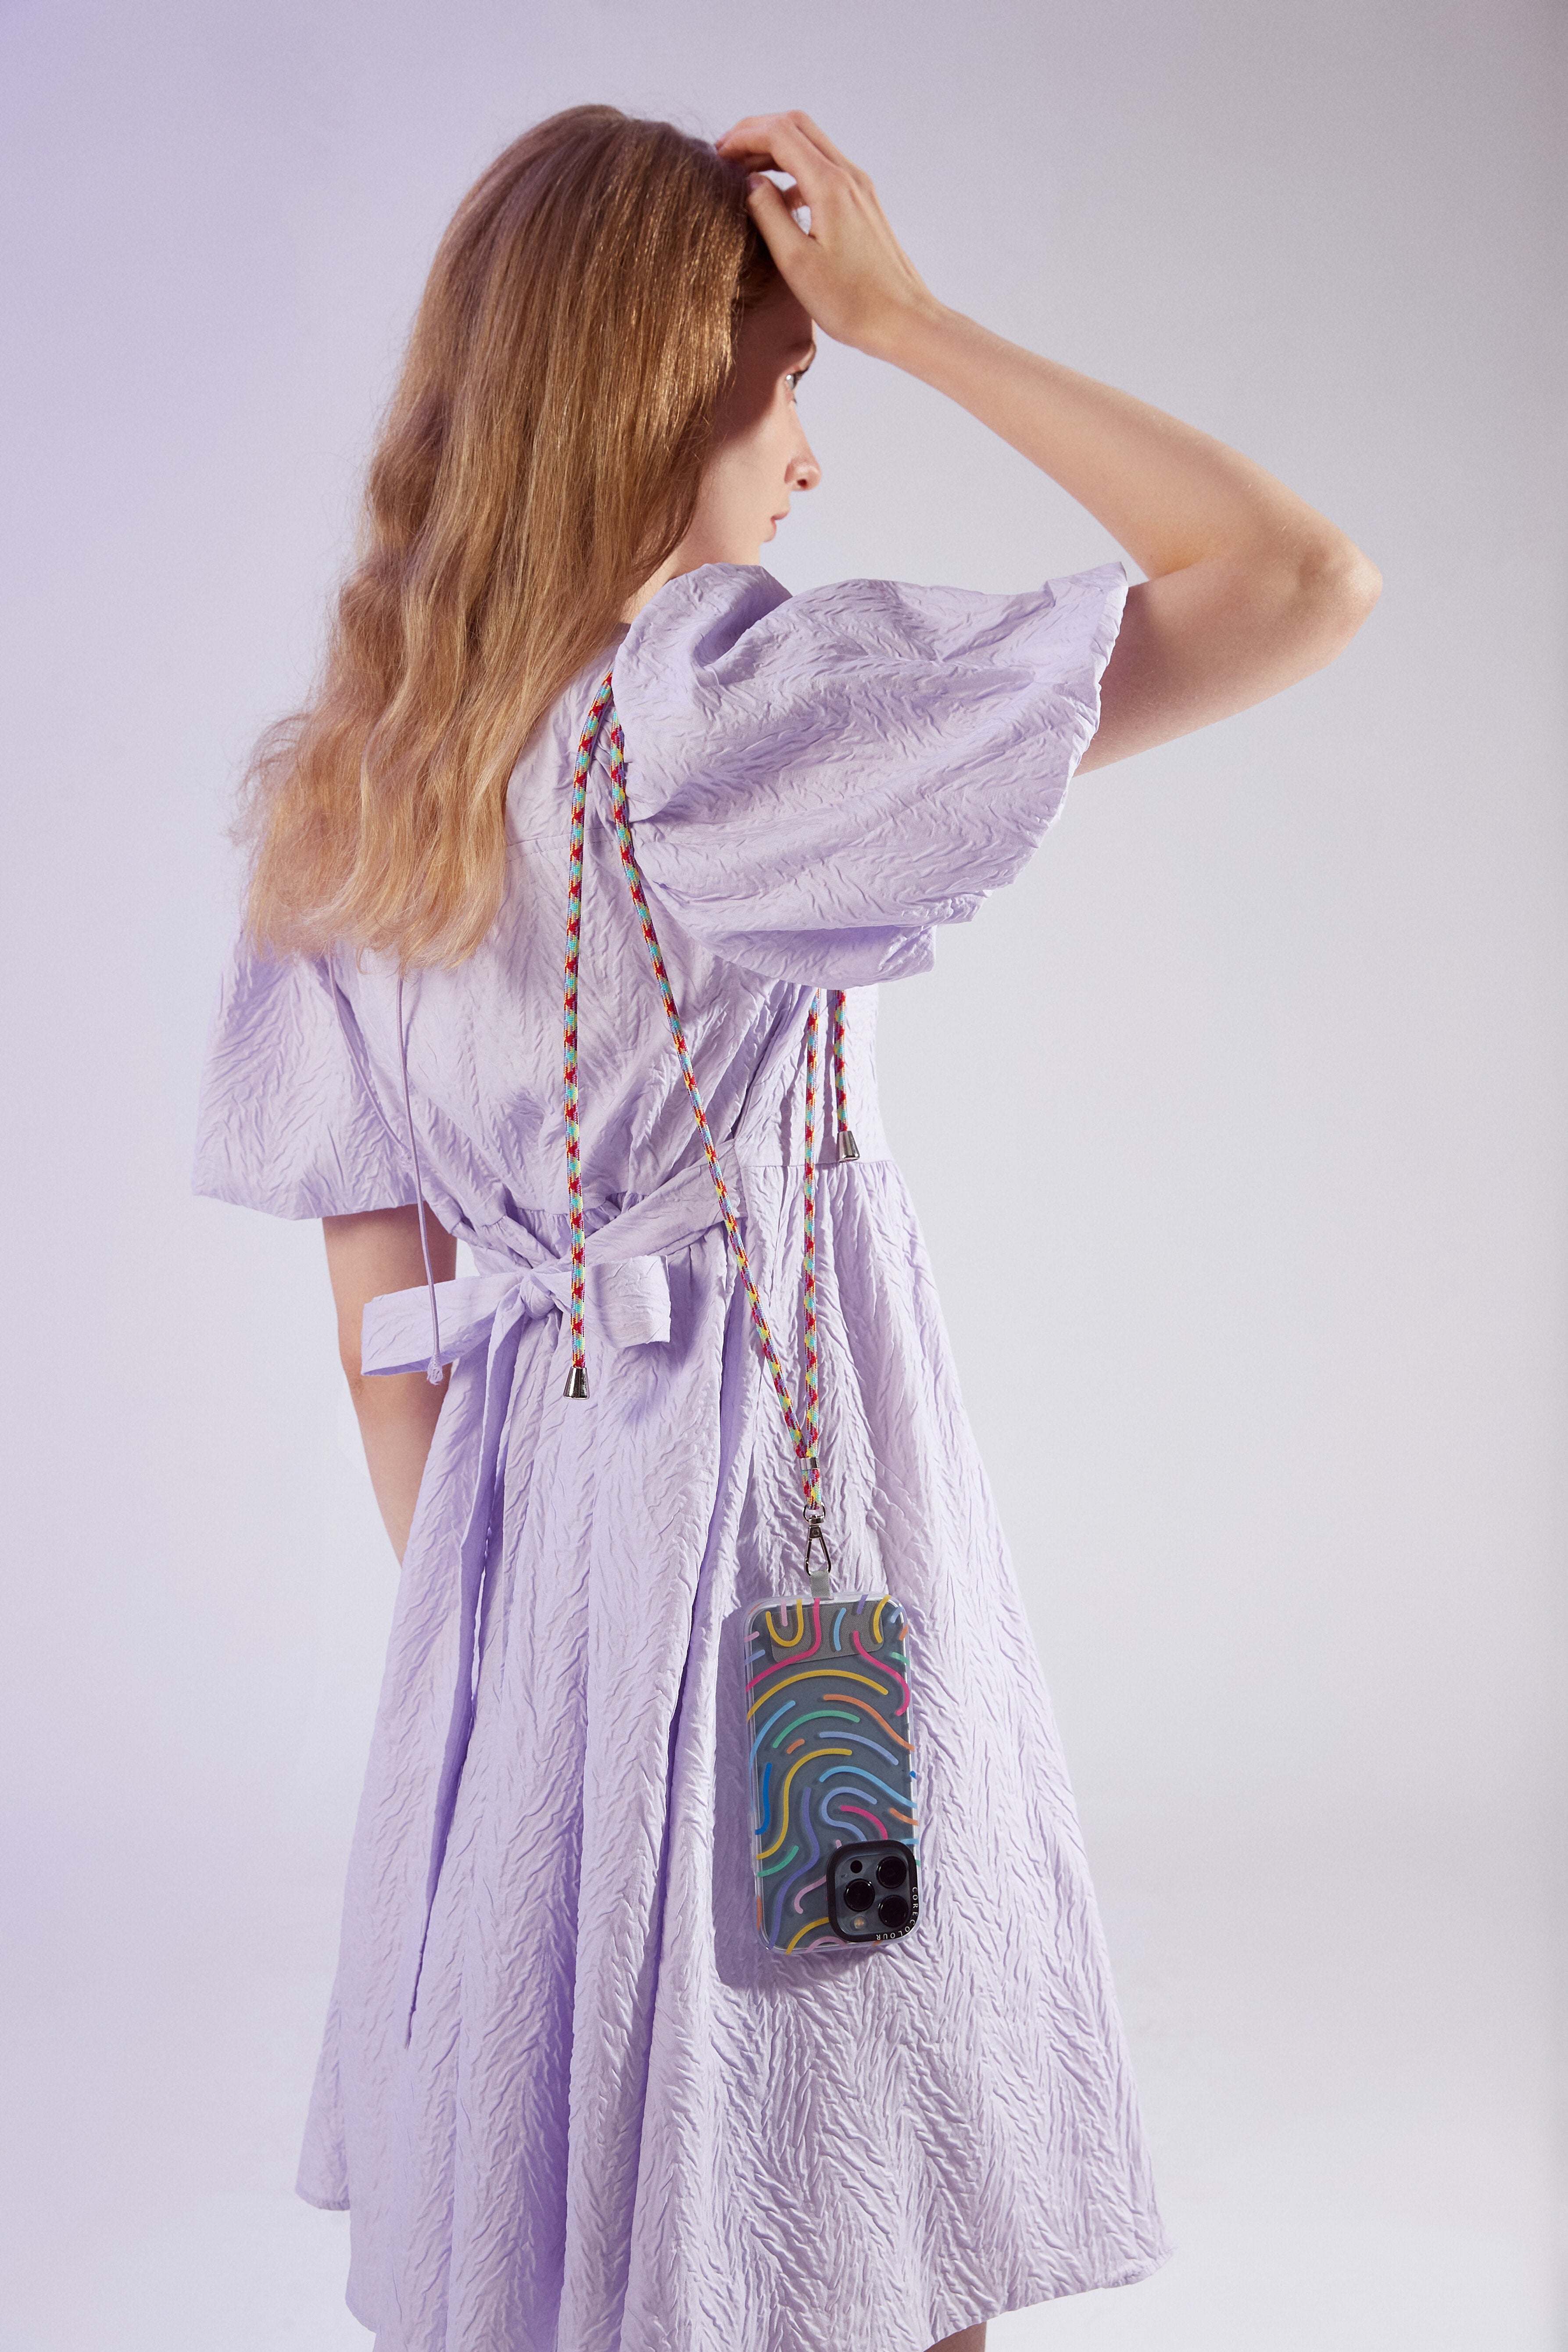 A girl in light pink dress with the stylish phone strap adorned with rainbow braided cord